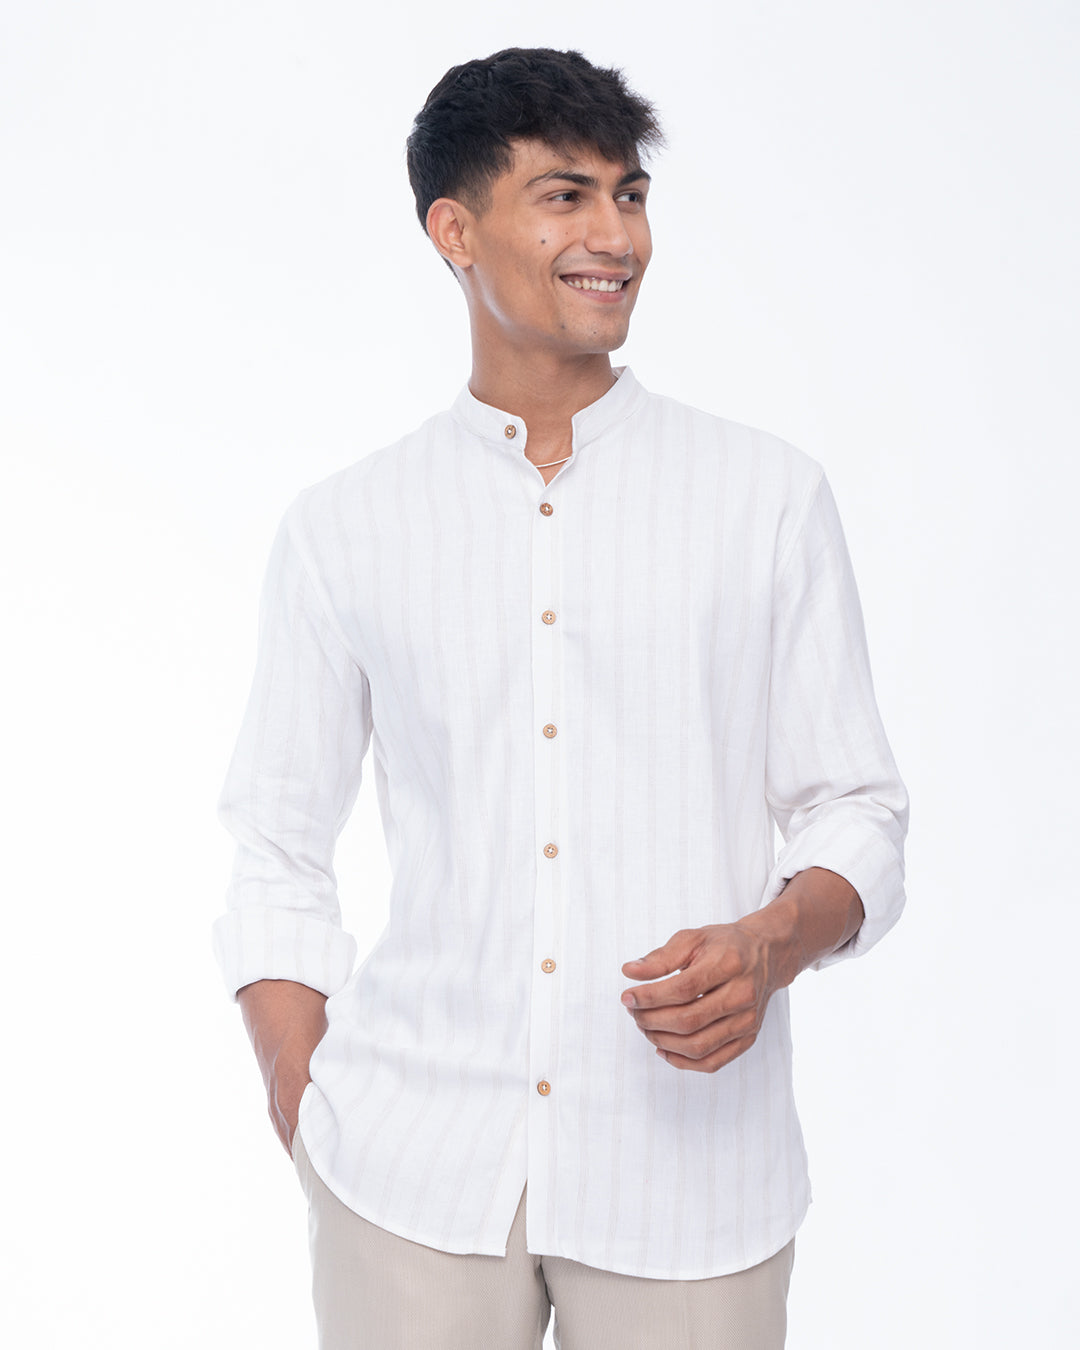 A person with short dark hair is smiling and wearing a Seashell White - Mandarin Shirt made from premium cotton. They have one hand in their pocket and the other hand is holding the edge of their shirt. The background is a plain white studio setting.